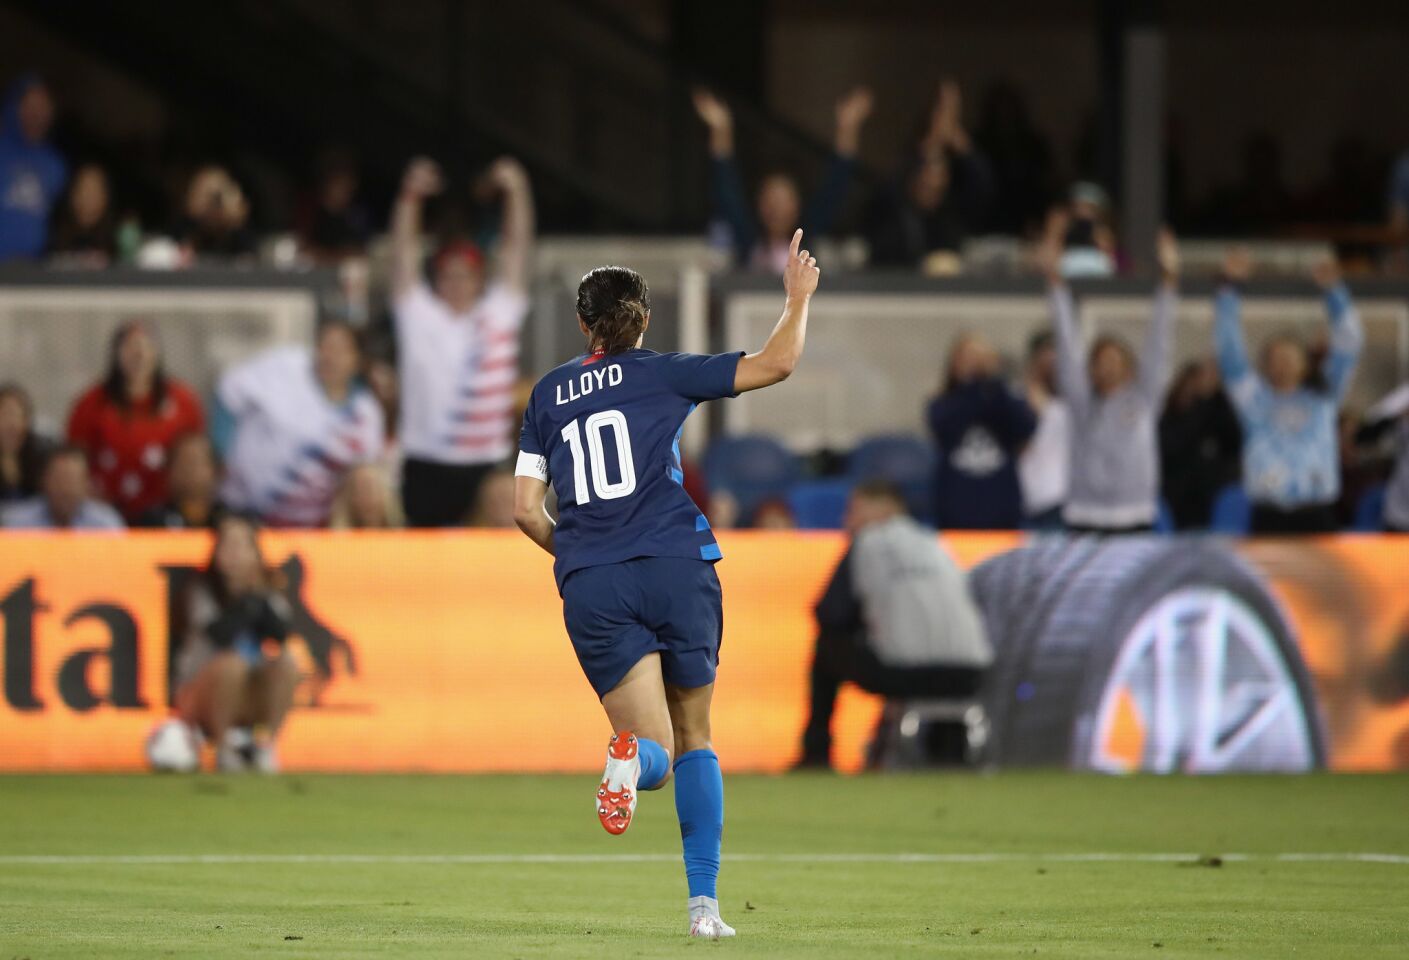 SAN JOSE, CA - SEPTEMBER 04: Carli Lloyd of the United States celebrates her second goal against Chili during their match at Avaya Stadium on September 4, 2018 in San Jose, California. (Photo by Ezra Shaw/Getty Images) ** OUTS - ELSENT, FPG, CM - OUTS * NM, PH, VA if sourced by CT, LA or MoD **